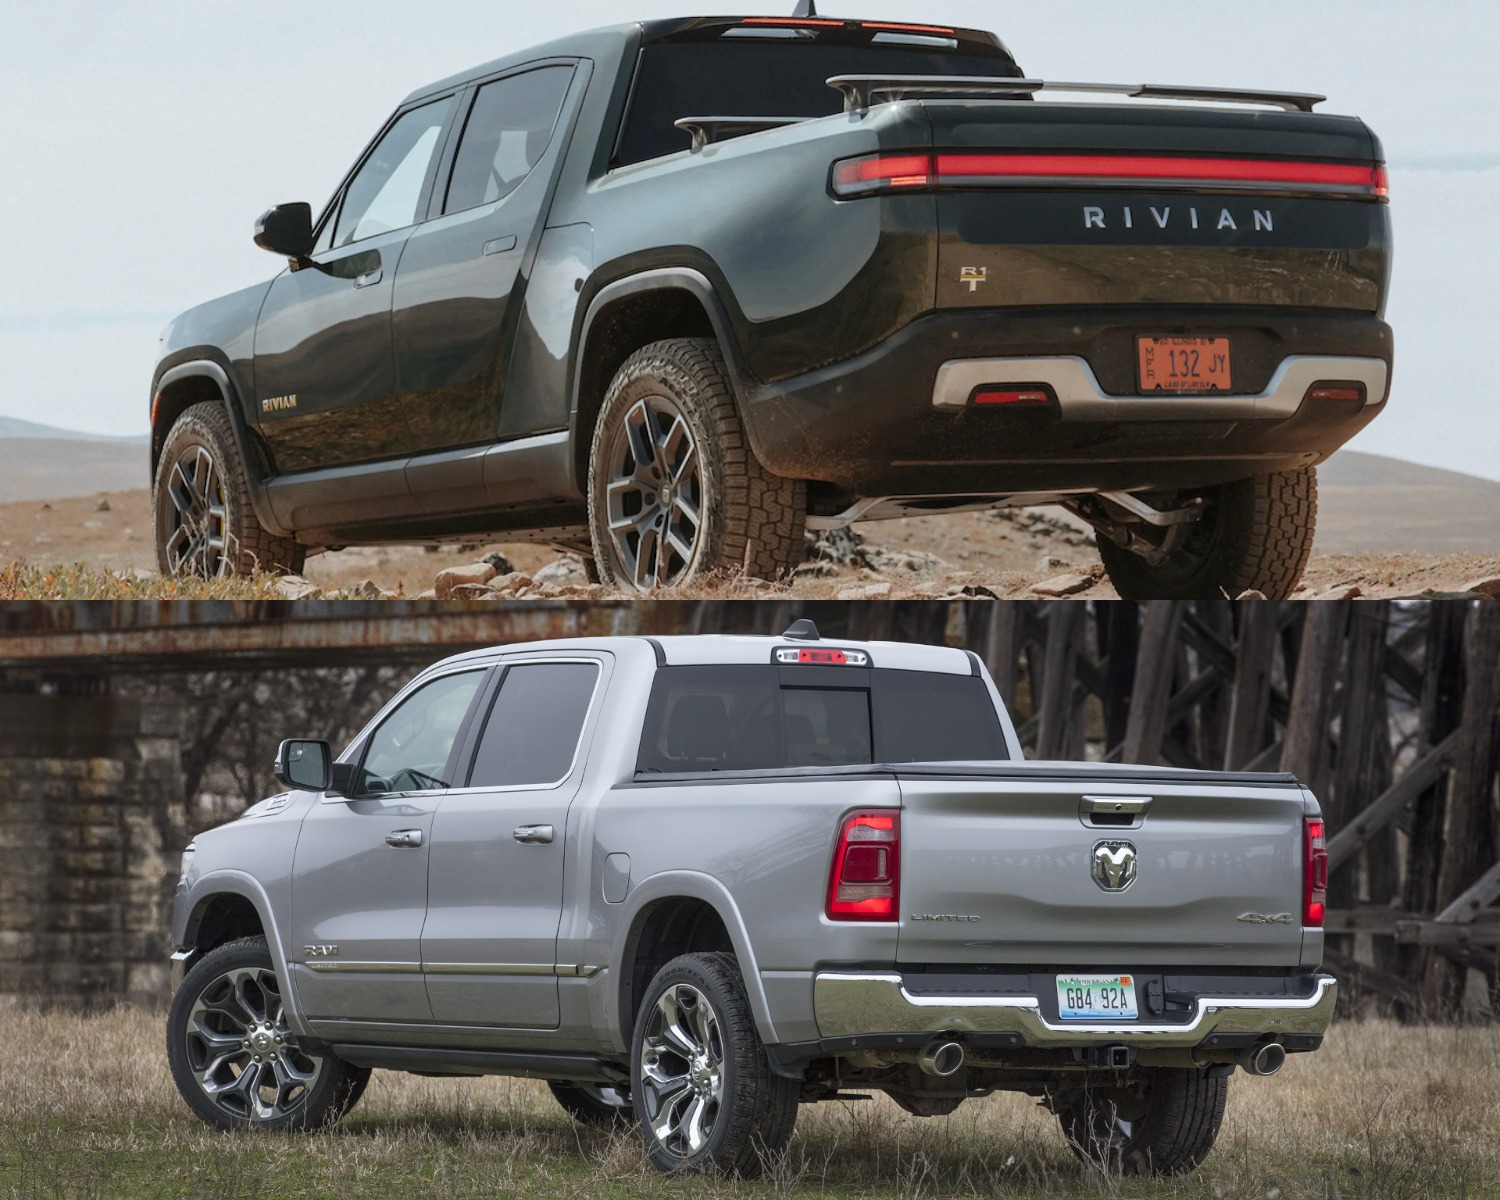 Comparing the 2022 Rivian R1T electric truck to the 2022 Ram 1500 pickup truck